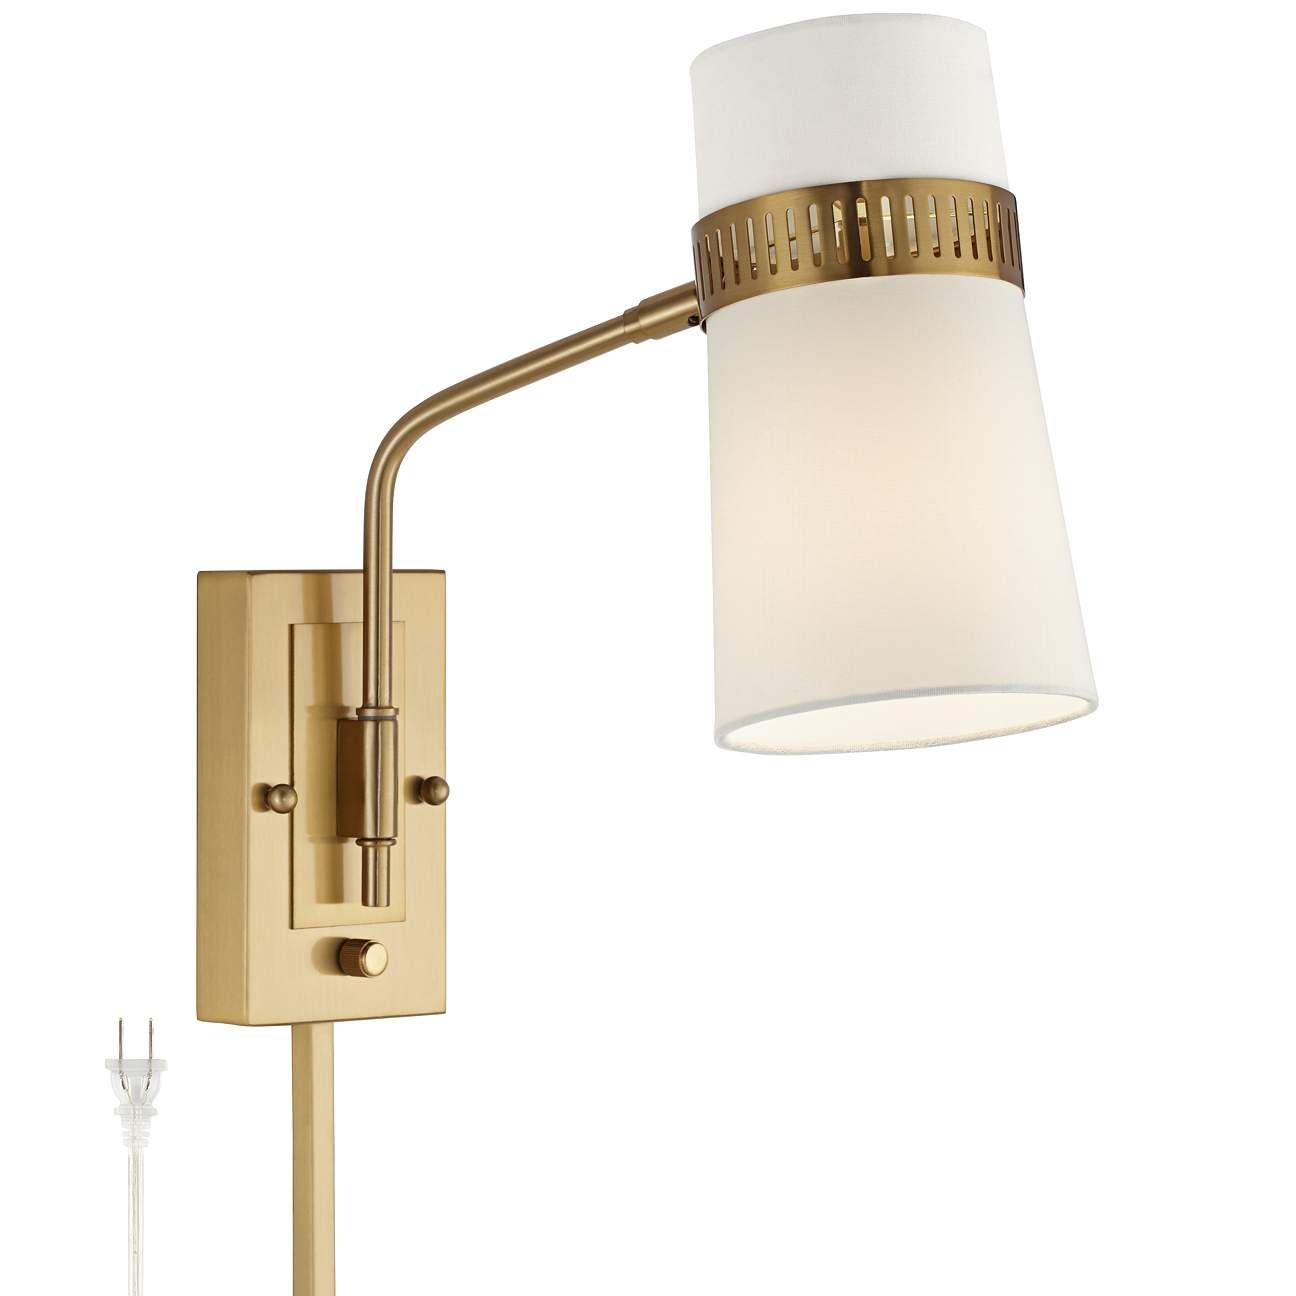 Possini Euro Cartwright Antique Brass Plug-In Wall Lamp with Cord Cover | Lamps Plus